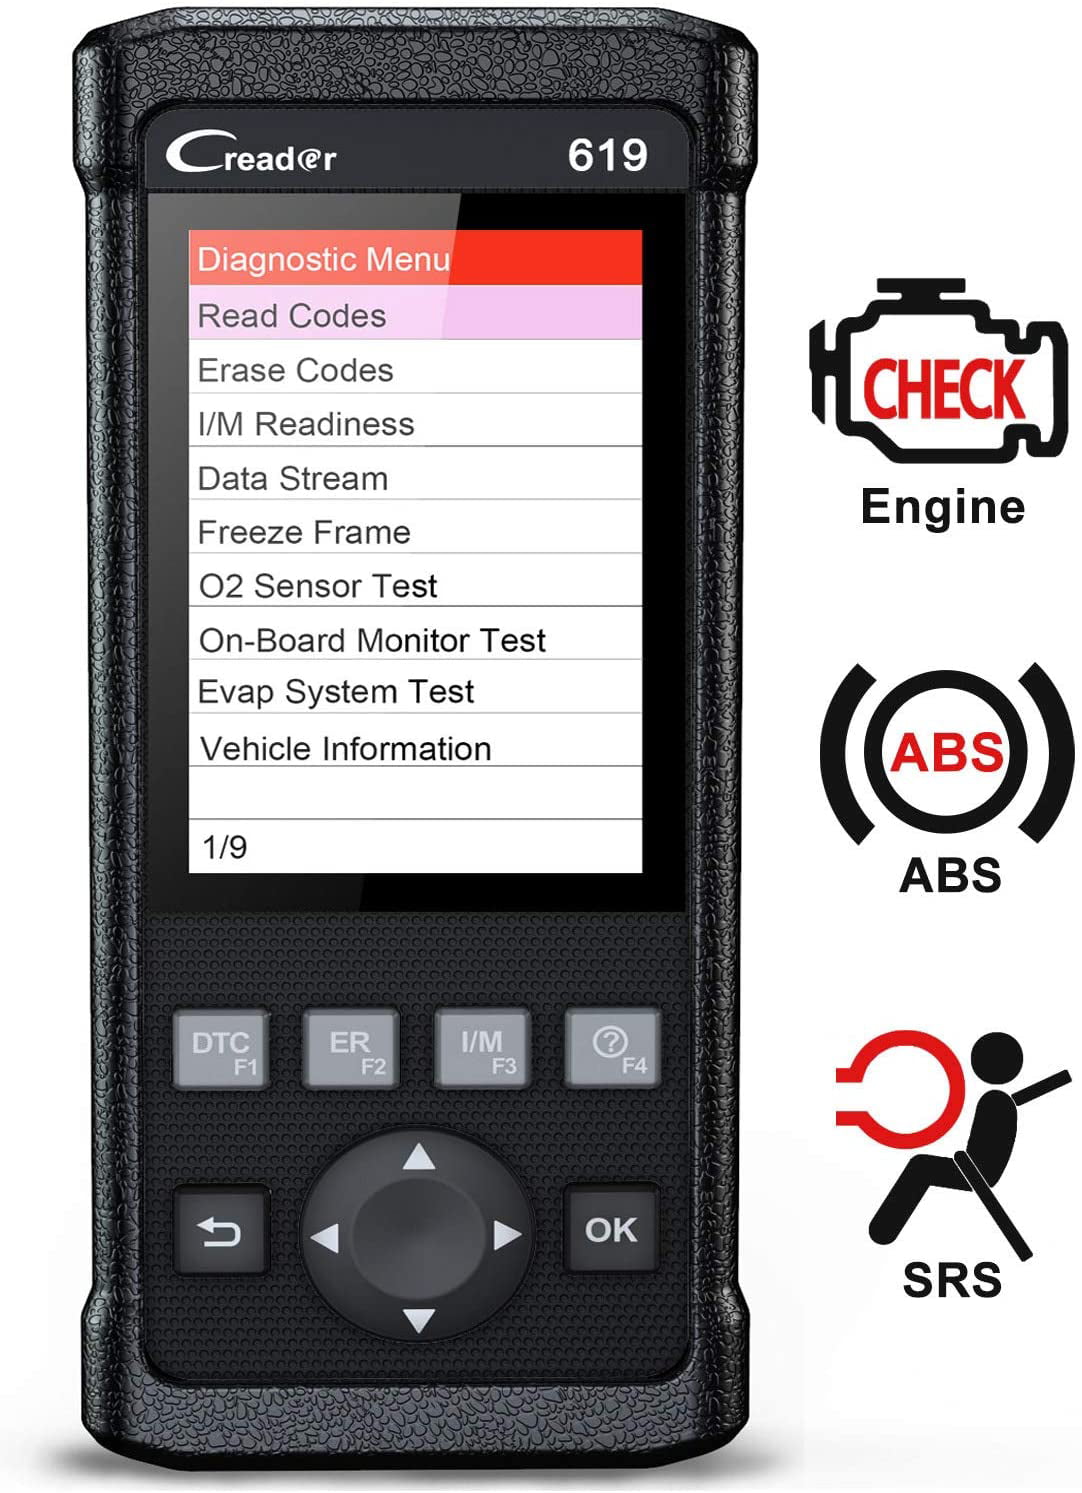 Launch Creader CR619 Automotive ABS SRS Diagnostic Scan Tool Auto Obd ii OBD2 Scanner Car Code Reader Check Engine SRS ABS Airbag Light Fault Code Reader with EVAP O2 On-board Monitor Test 